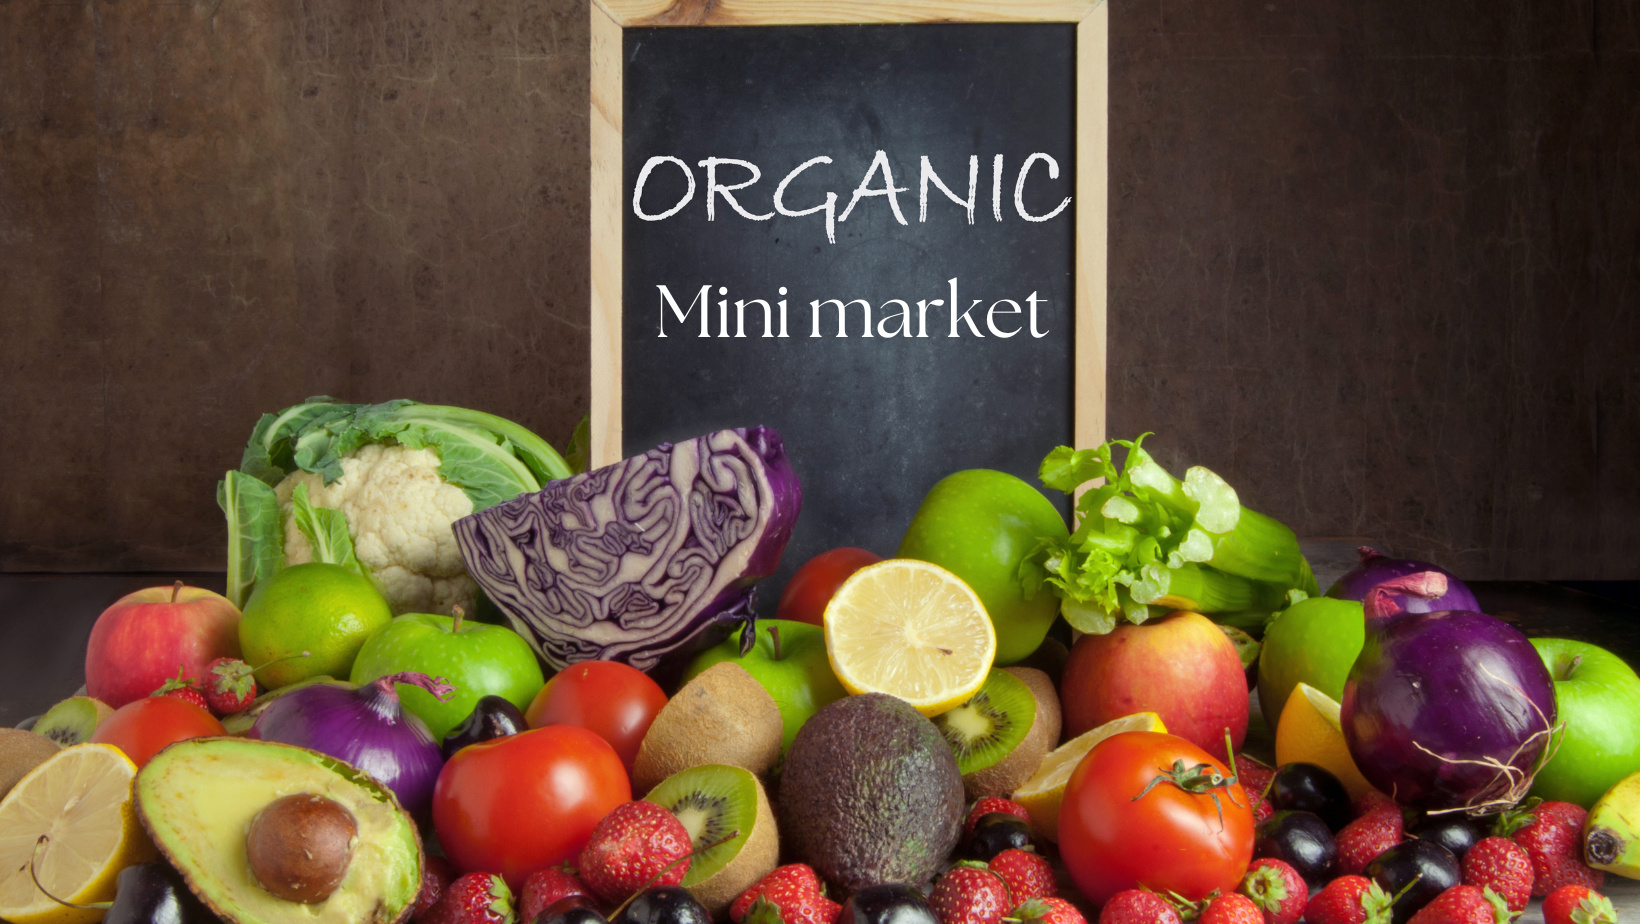 ORGANIC MINI MARKET  FRESH FROM THE FARM TO YOUR HOME